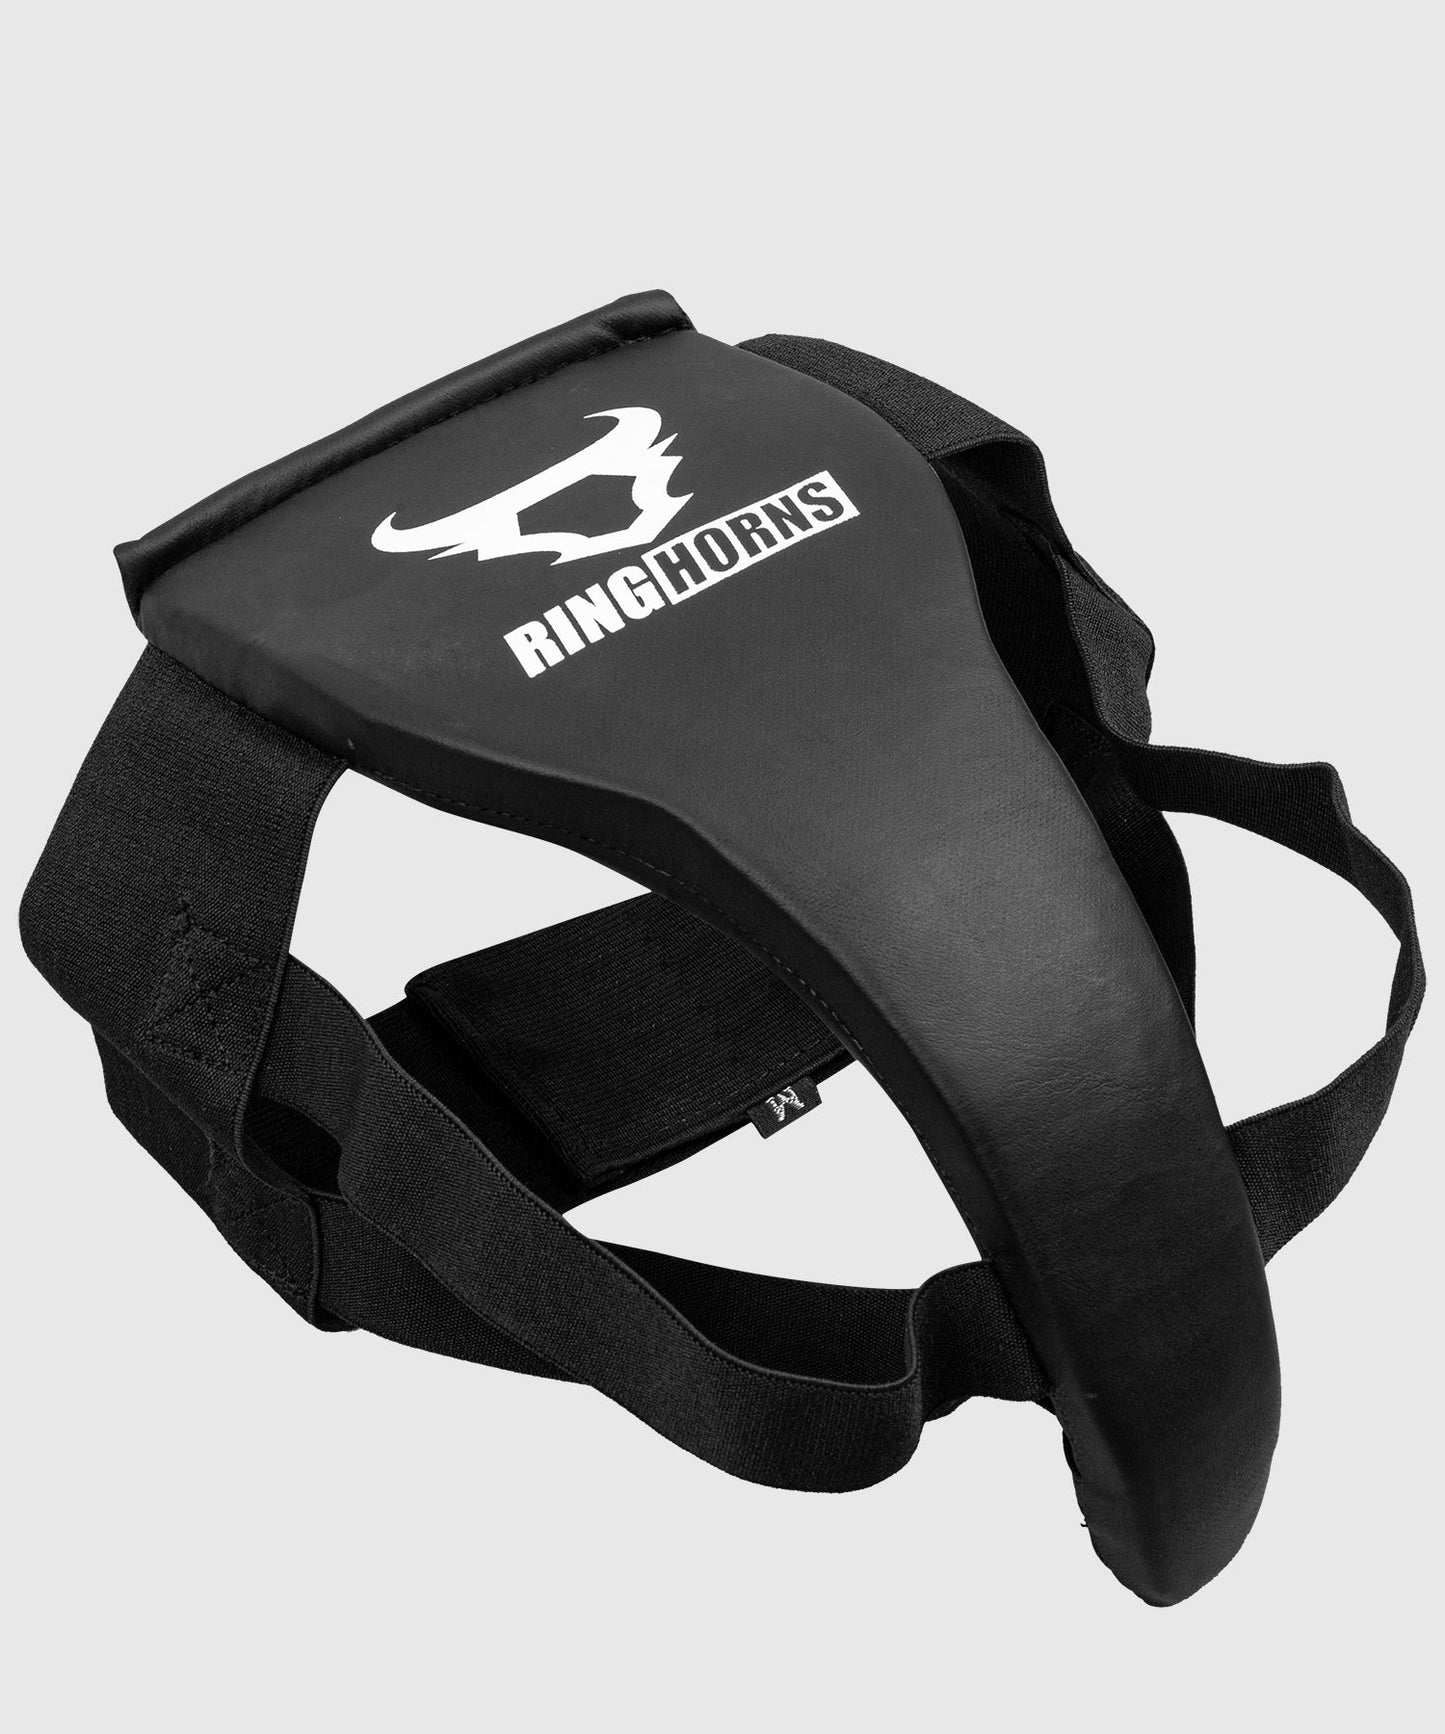 Ringhorns Charger Groin Guard & Support - For Women - Black